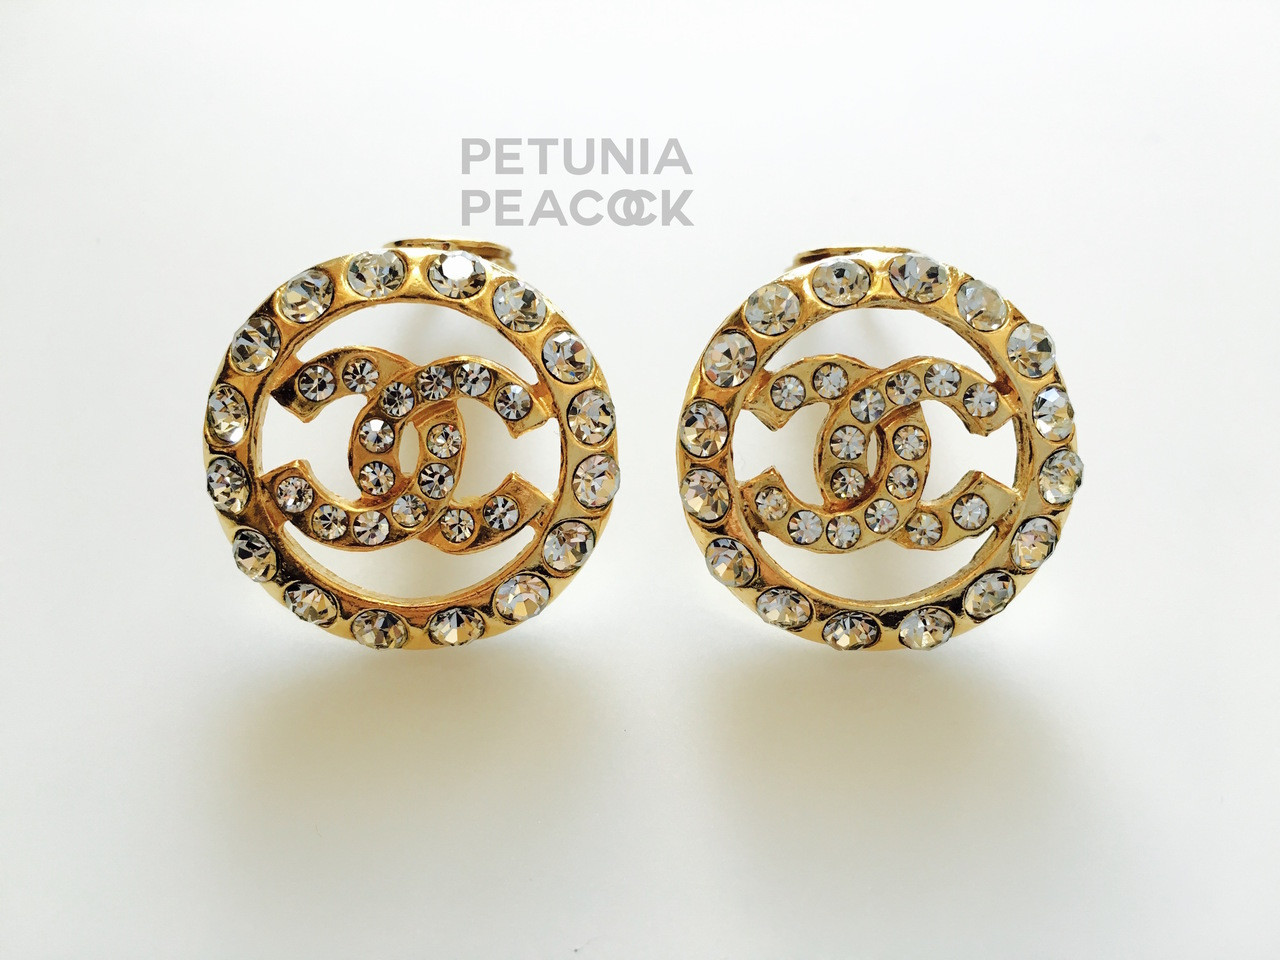 Afgift Dårlig skæbne Ironisk CHANEL CRYSTAL FILLED ROUND CC LOGO EARRINGS - Petunia Peacock Vintage  Chanel Jewelry